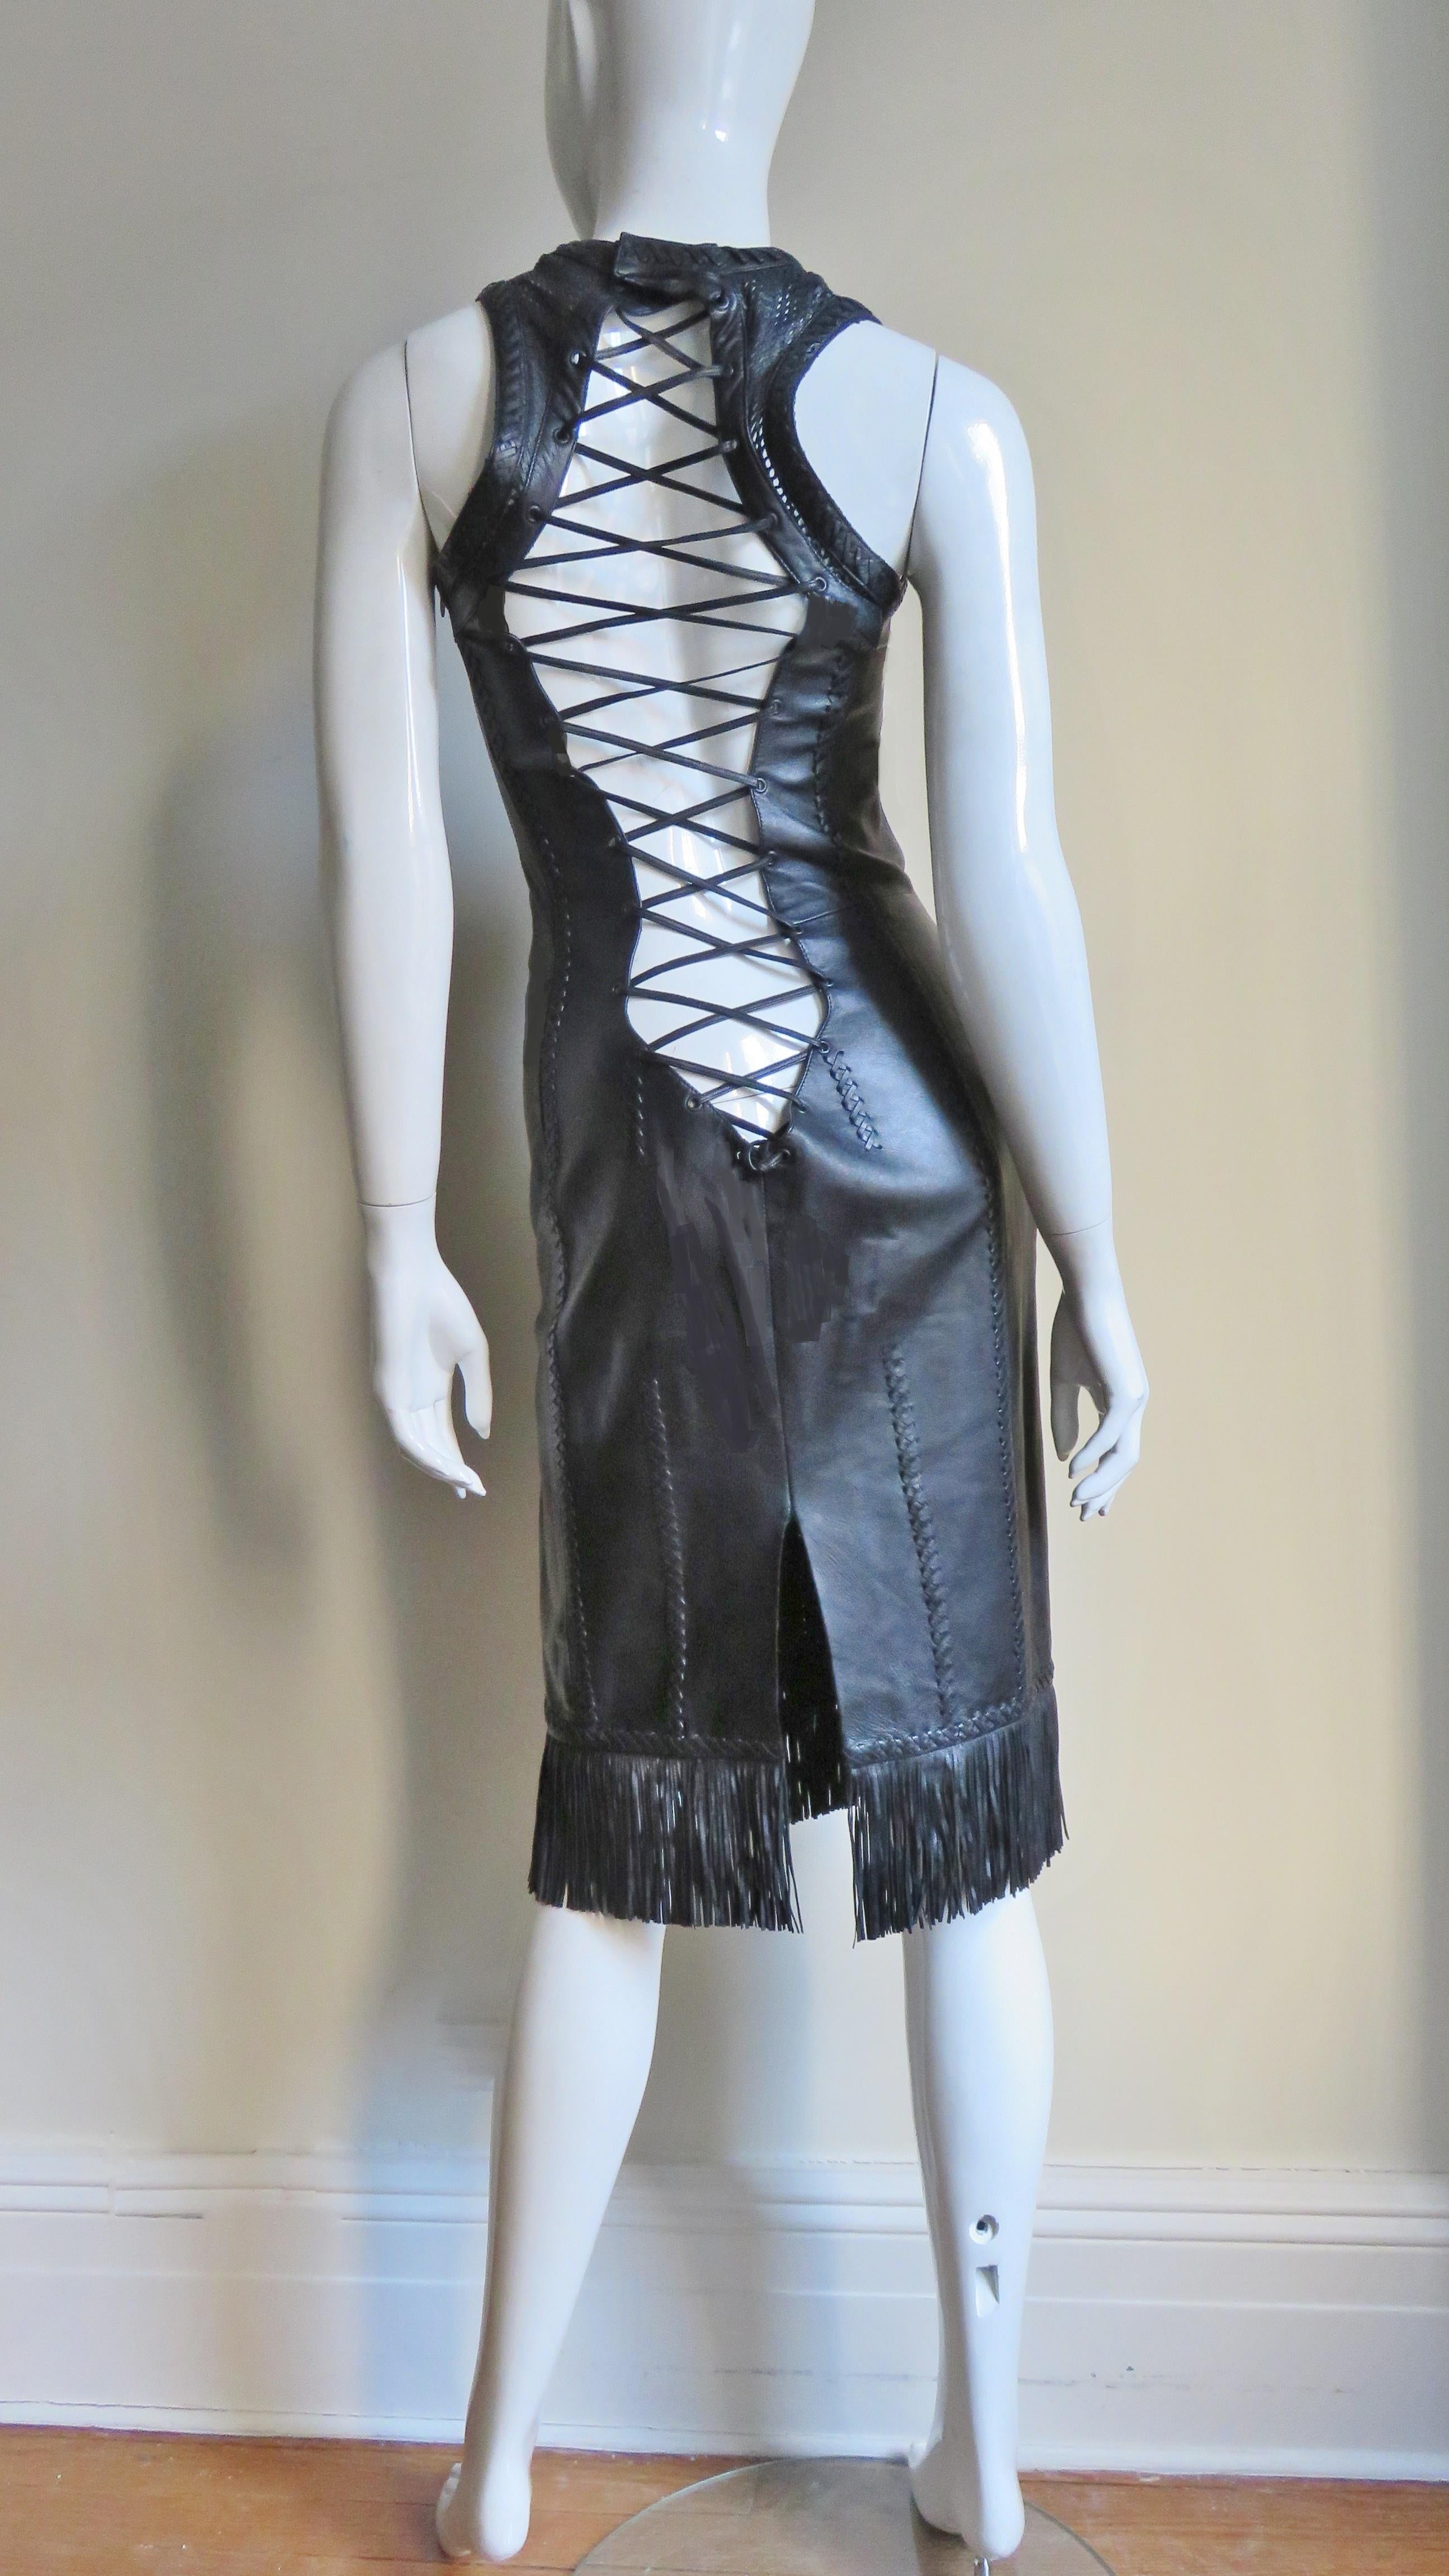  Gianni Versace Leather Lace up Dress S/S 2002 For Sale 11